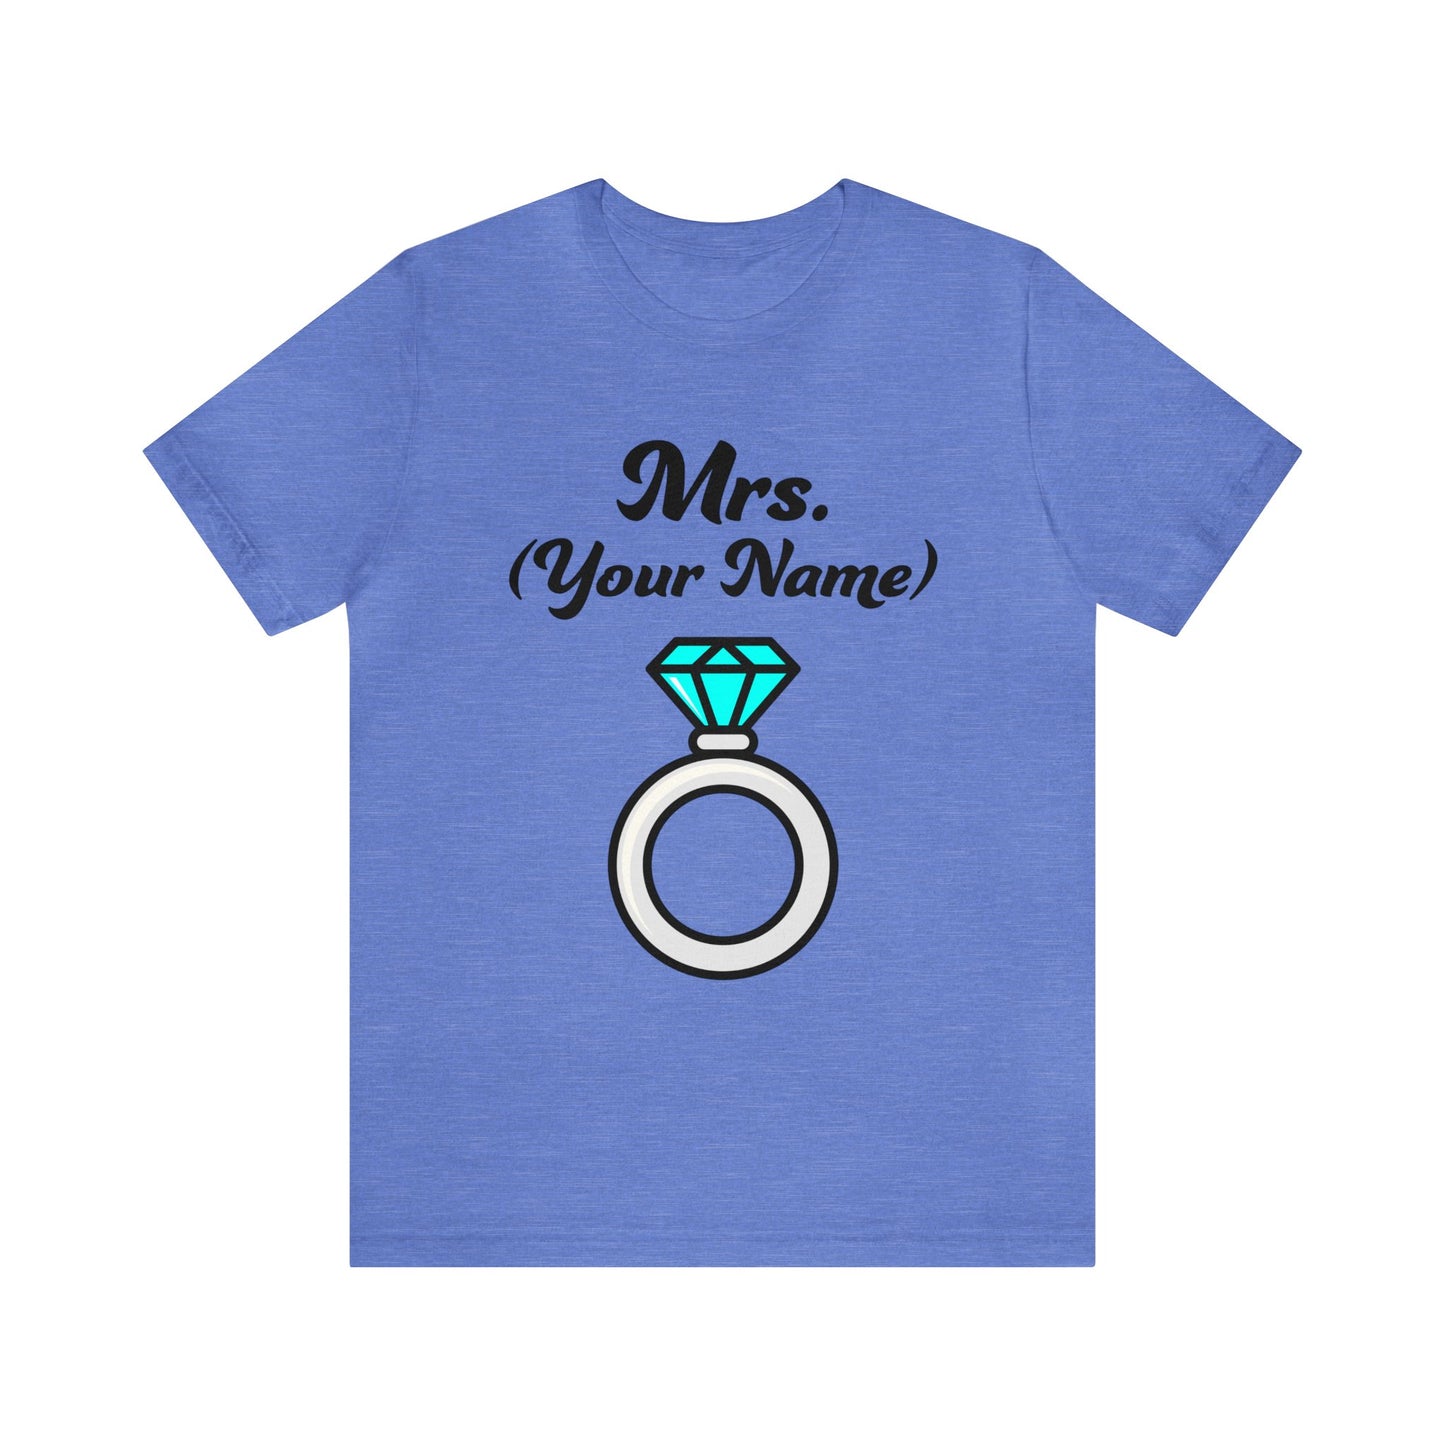 Mrs. (Your Name) Custom–Unisex Lightweight Fashion Tee–EXPRESS DELIVERY*